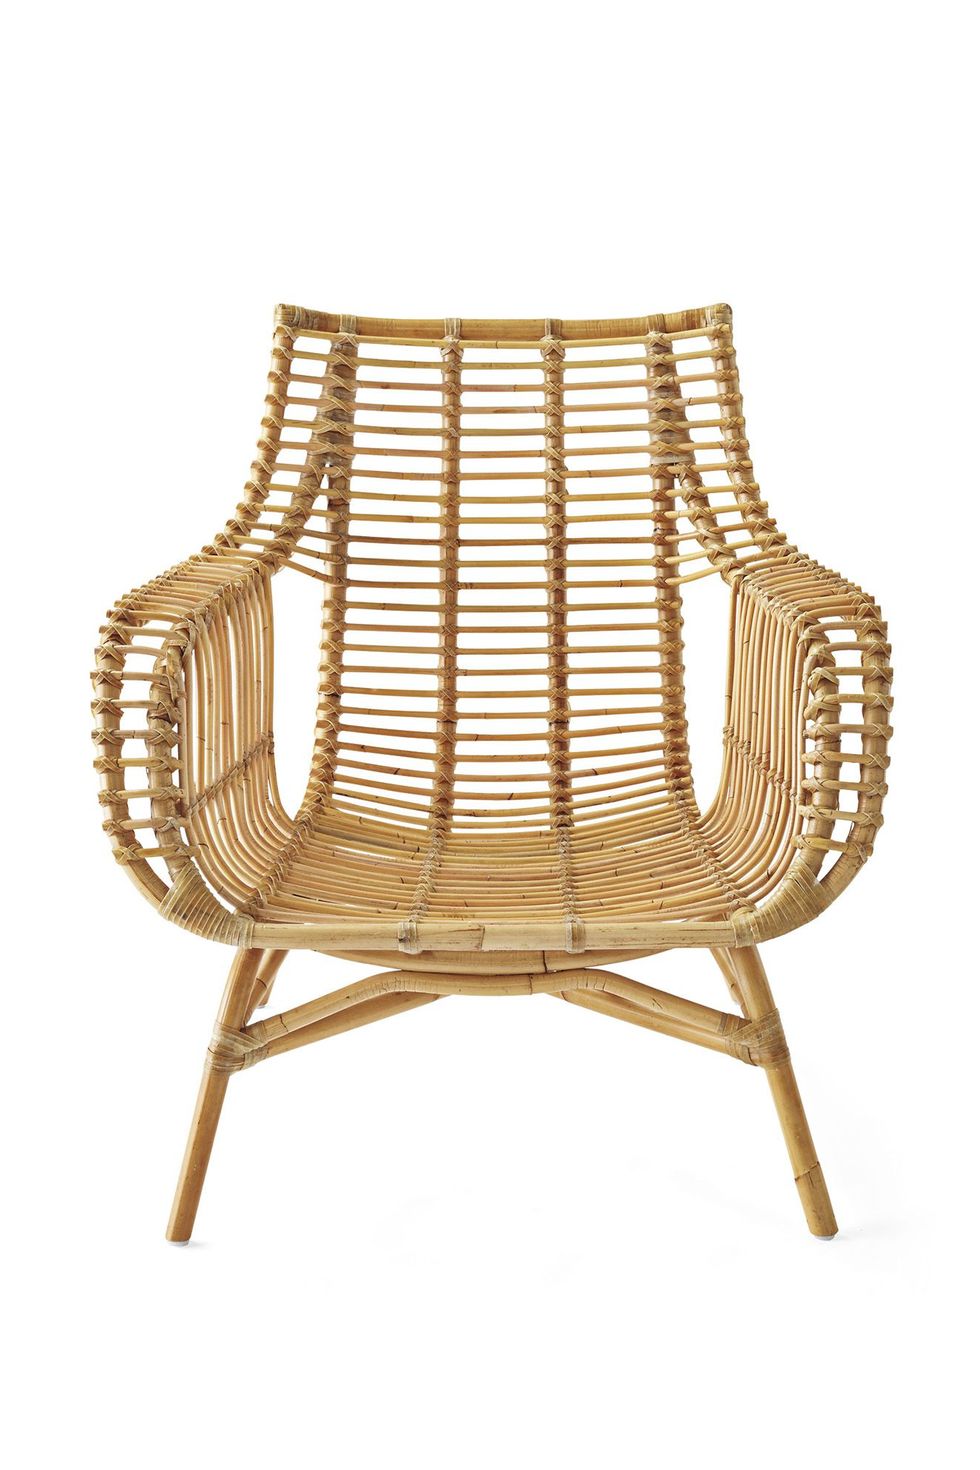 Get the Look: Venice Rattan Chair